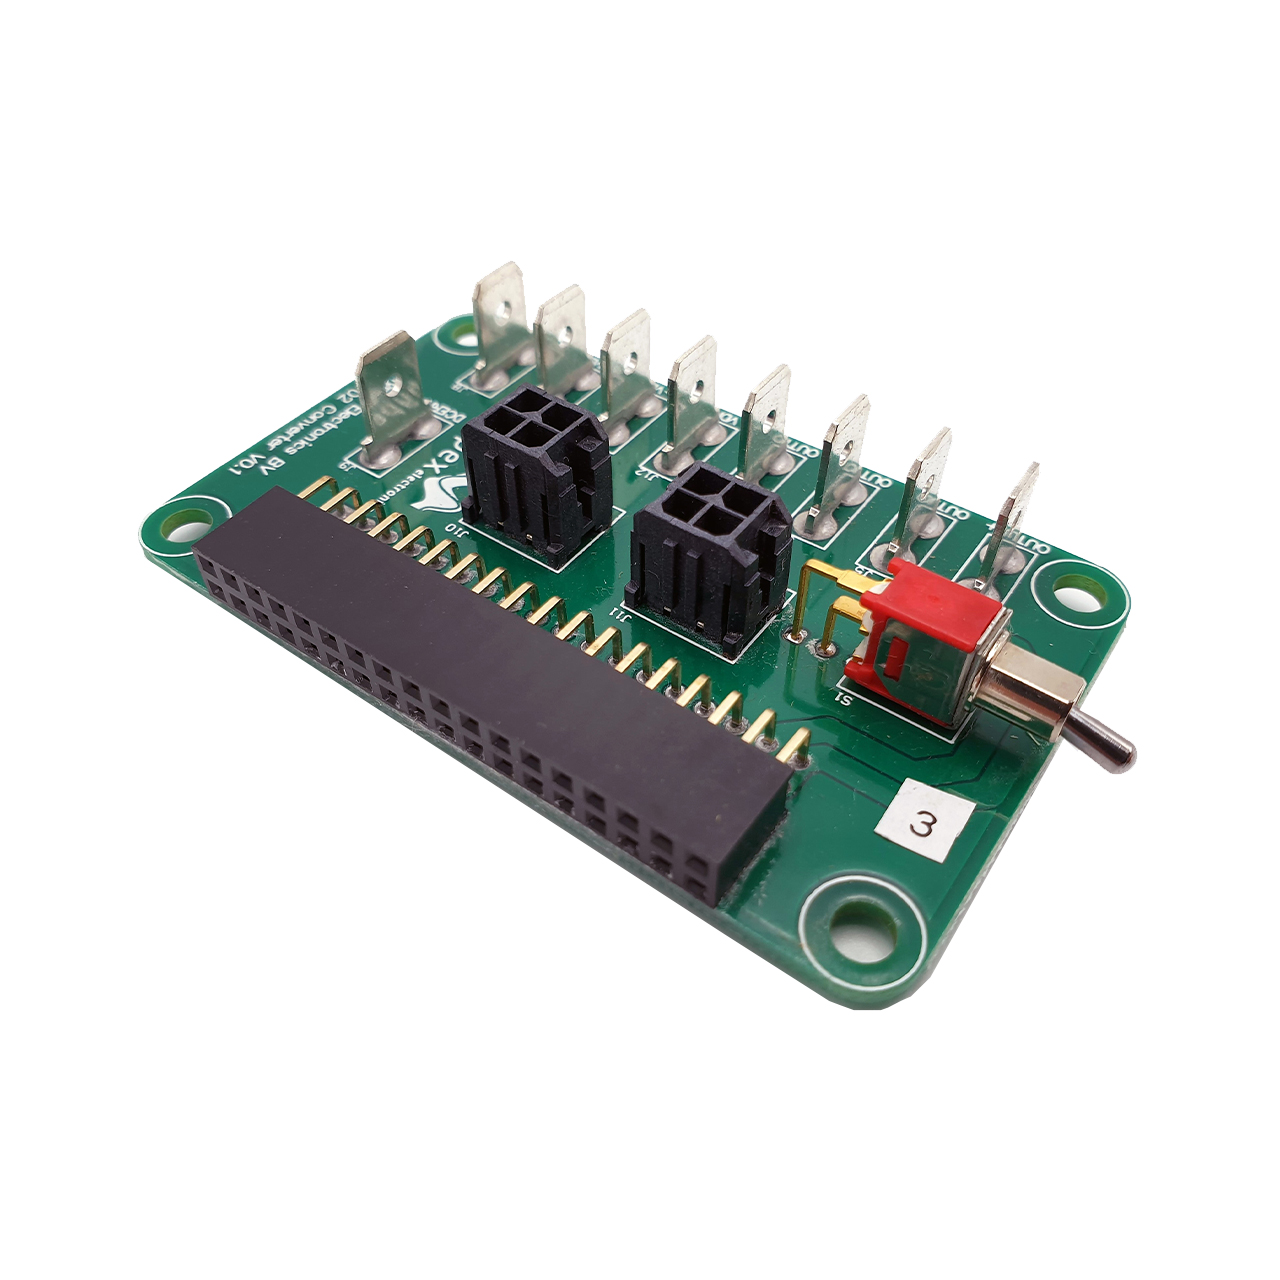 Hypex UcD™ 102 evaluation board